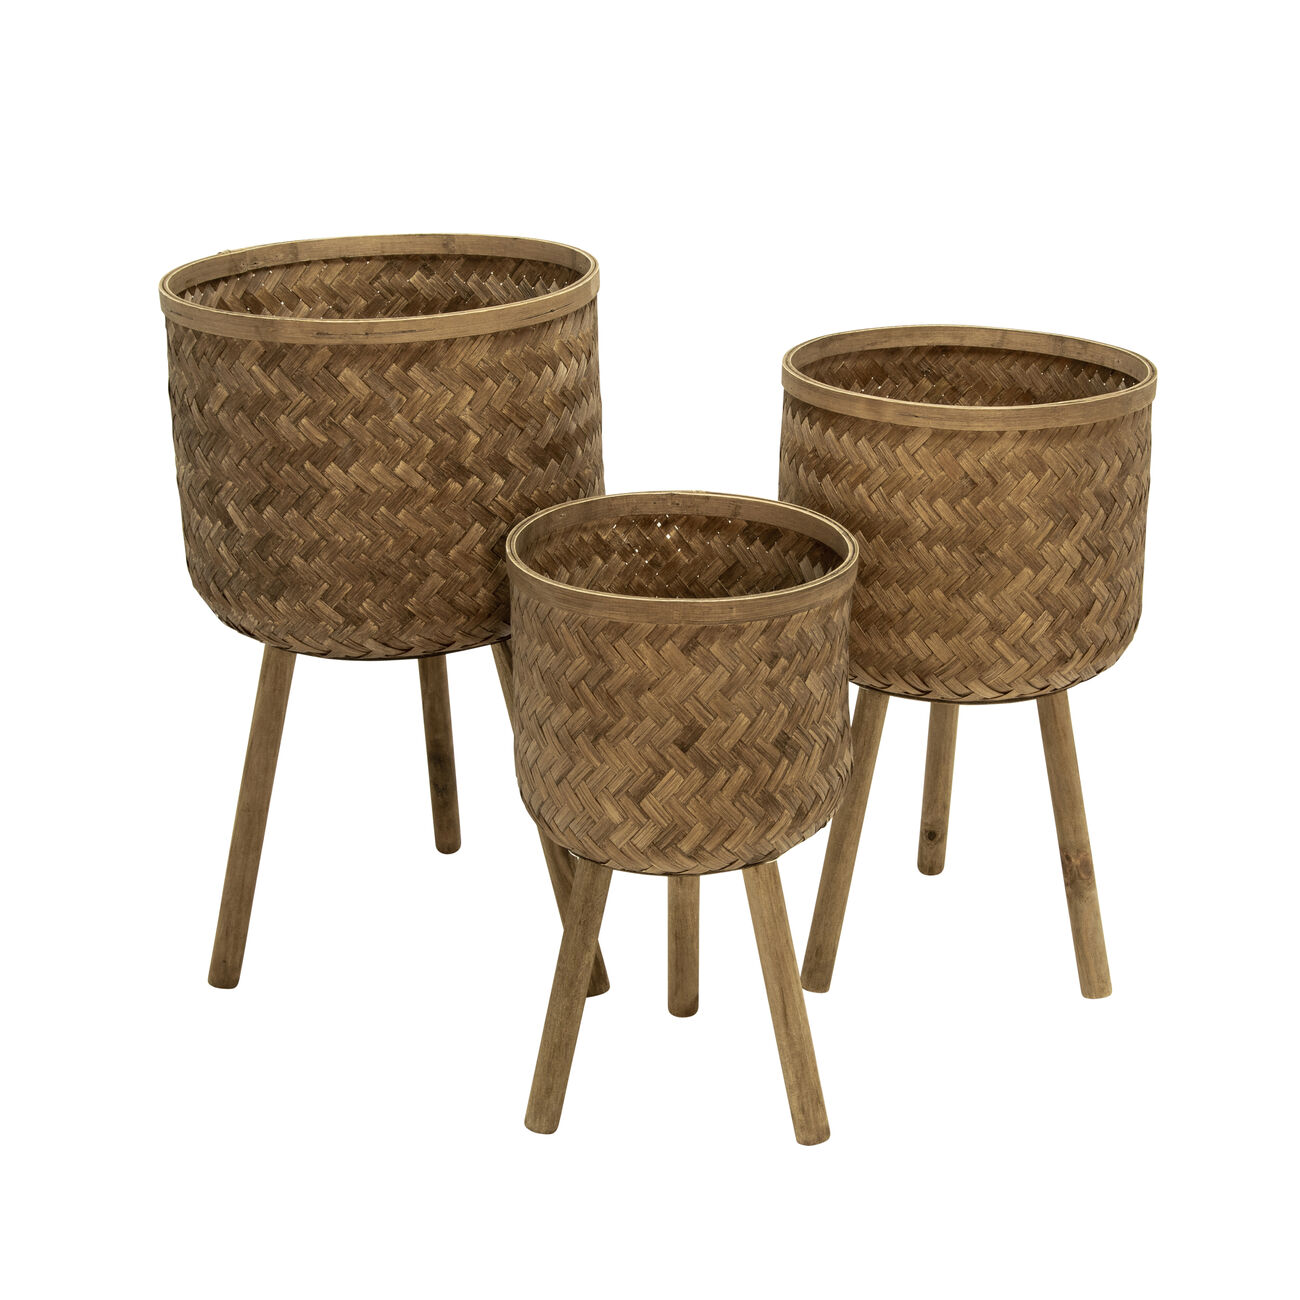 Round Bamboo Planters with Angled Tripod Legs, Set of 3, Brown